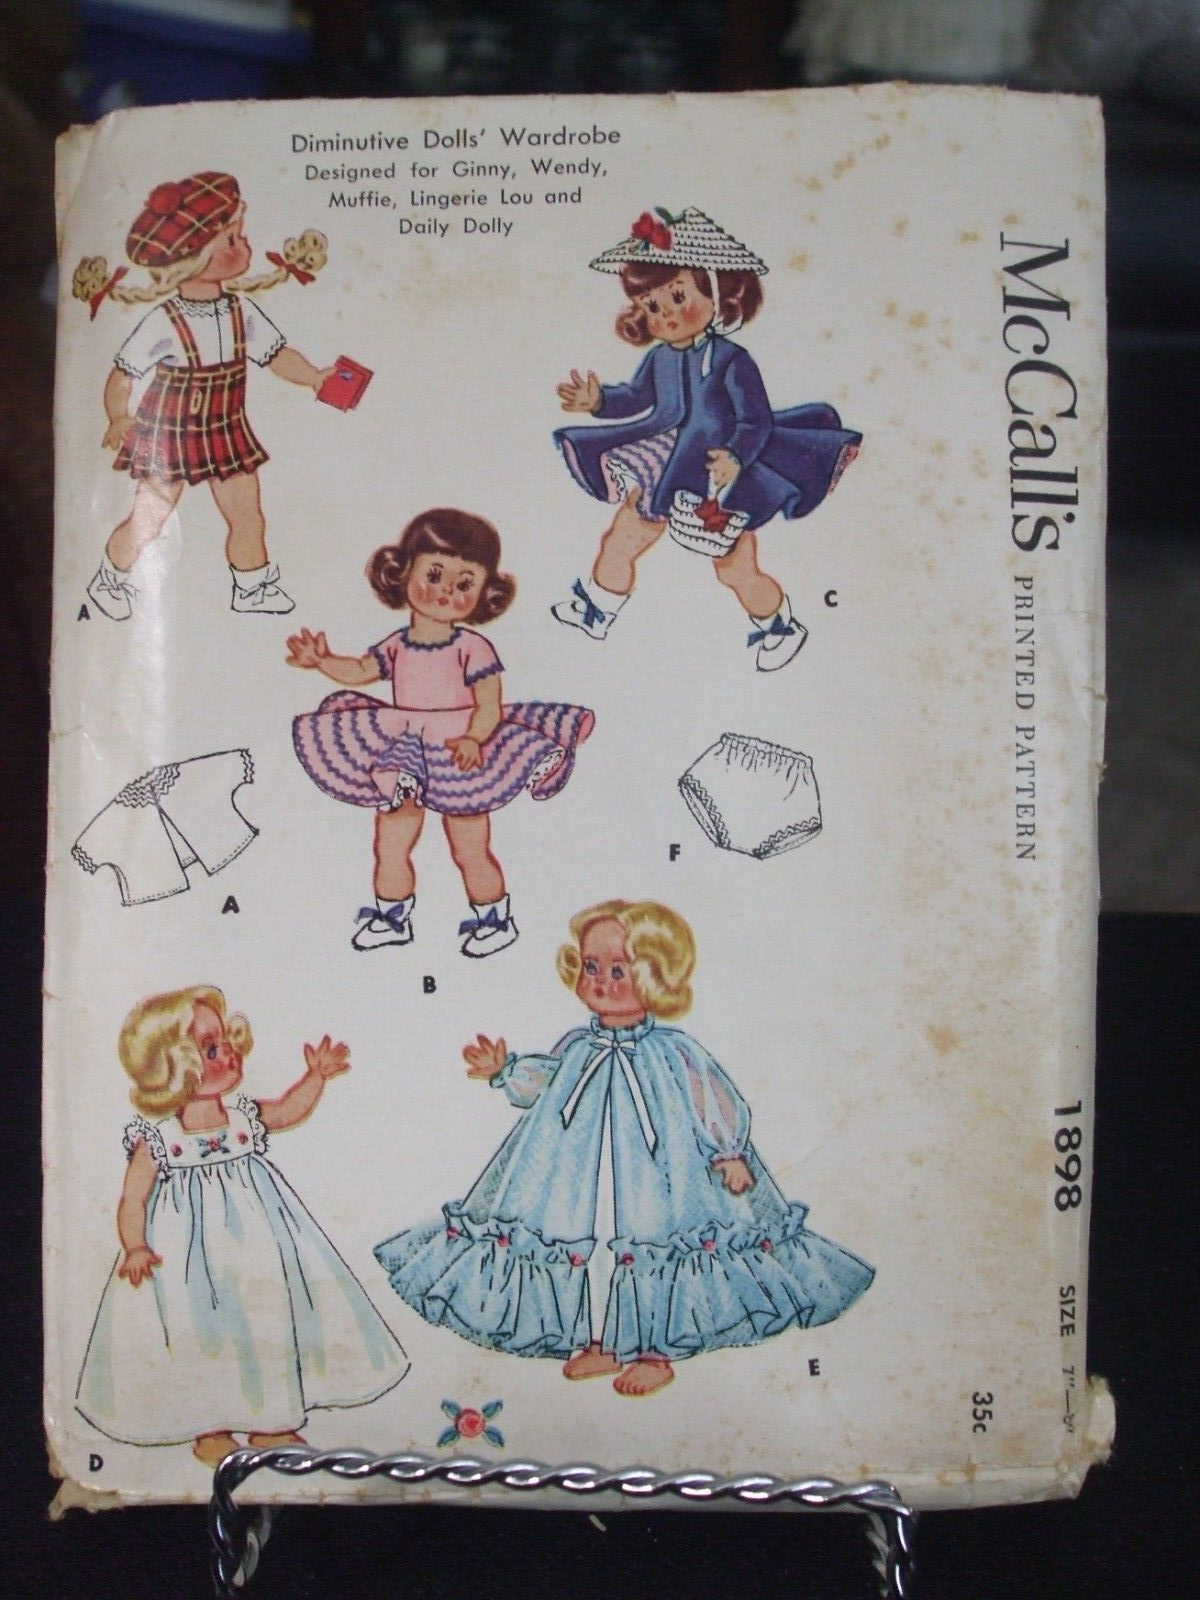 Vintage McCall's 1898 Diminutive Doll Clothes Pattern - Fits Size 7" to 8" Dolls - $16.18